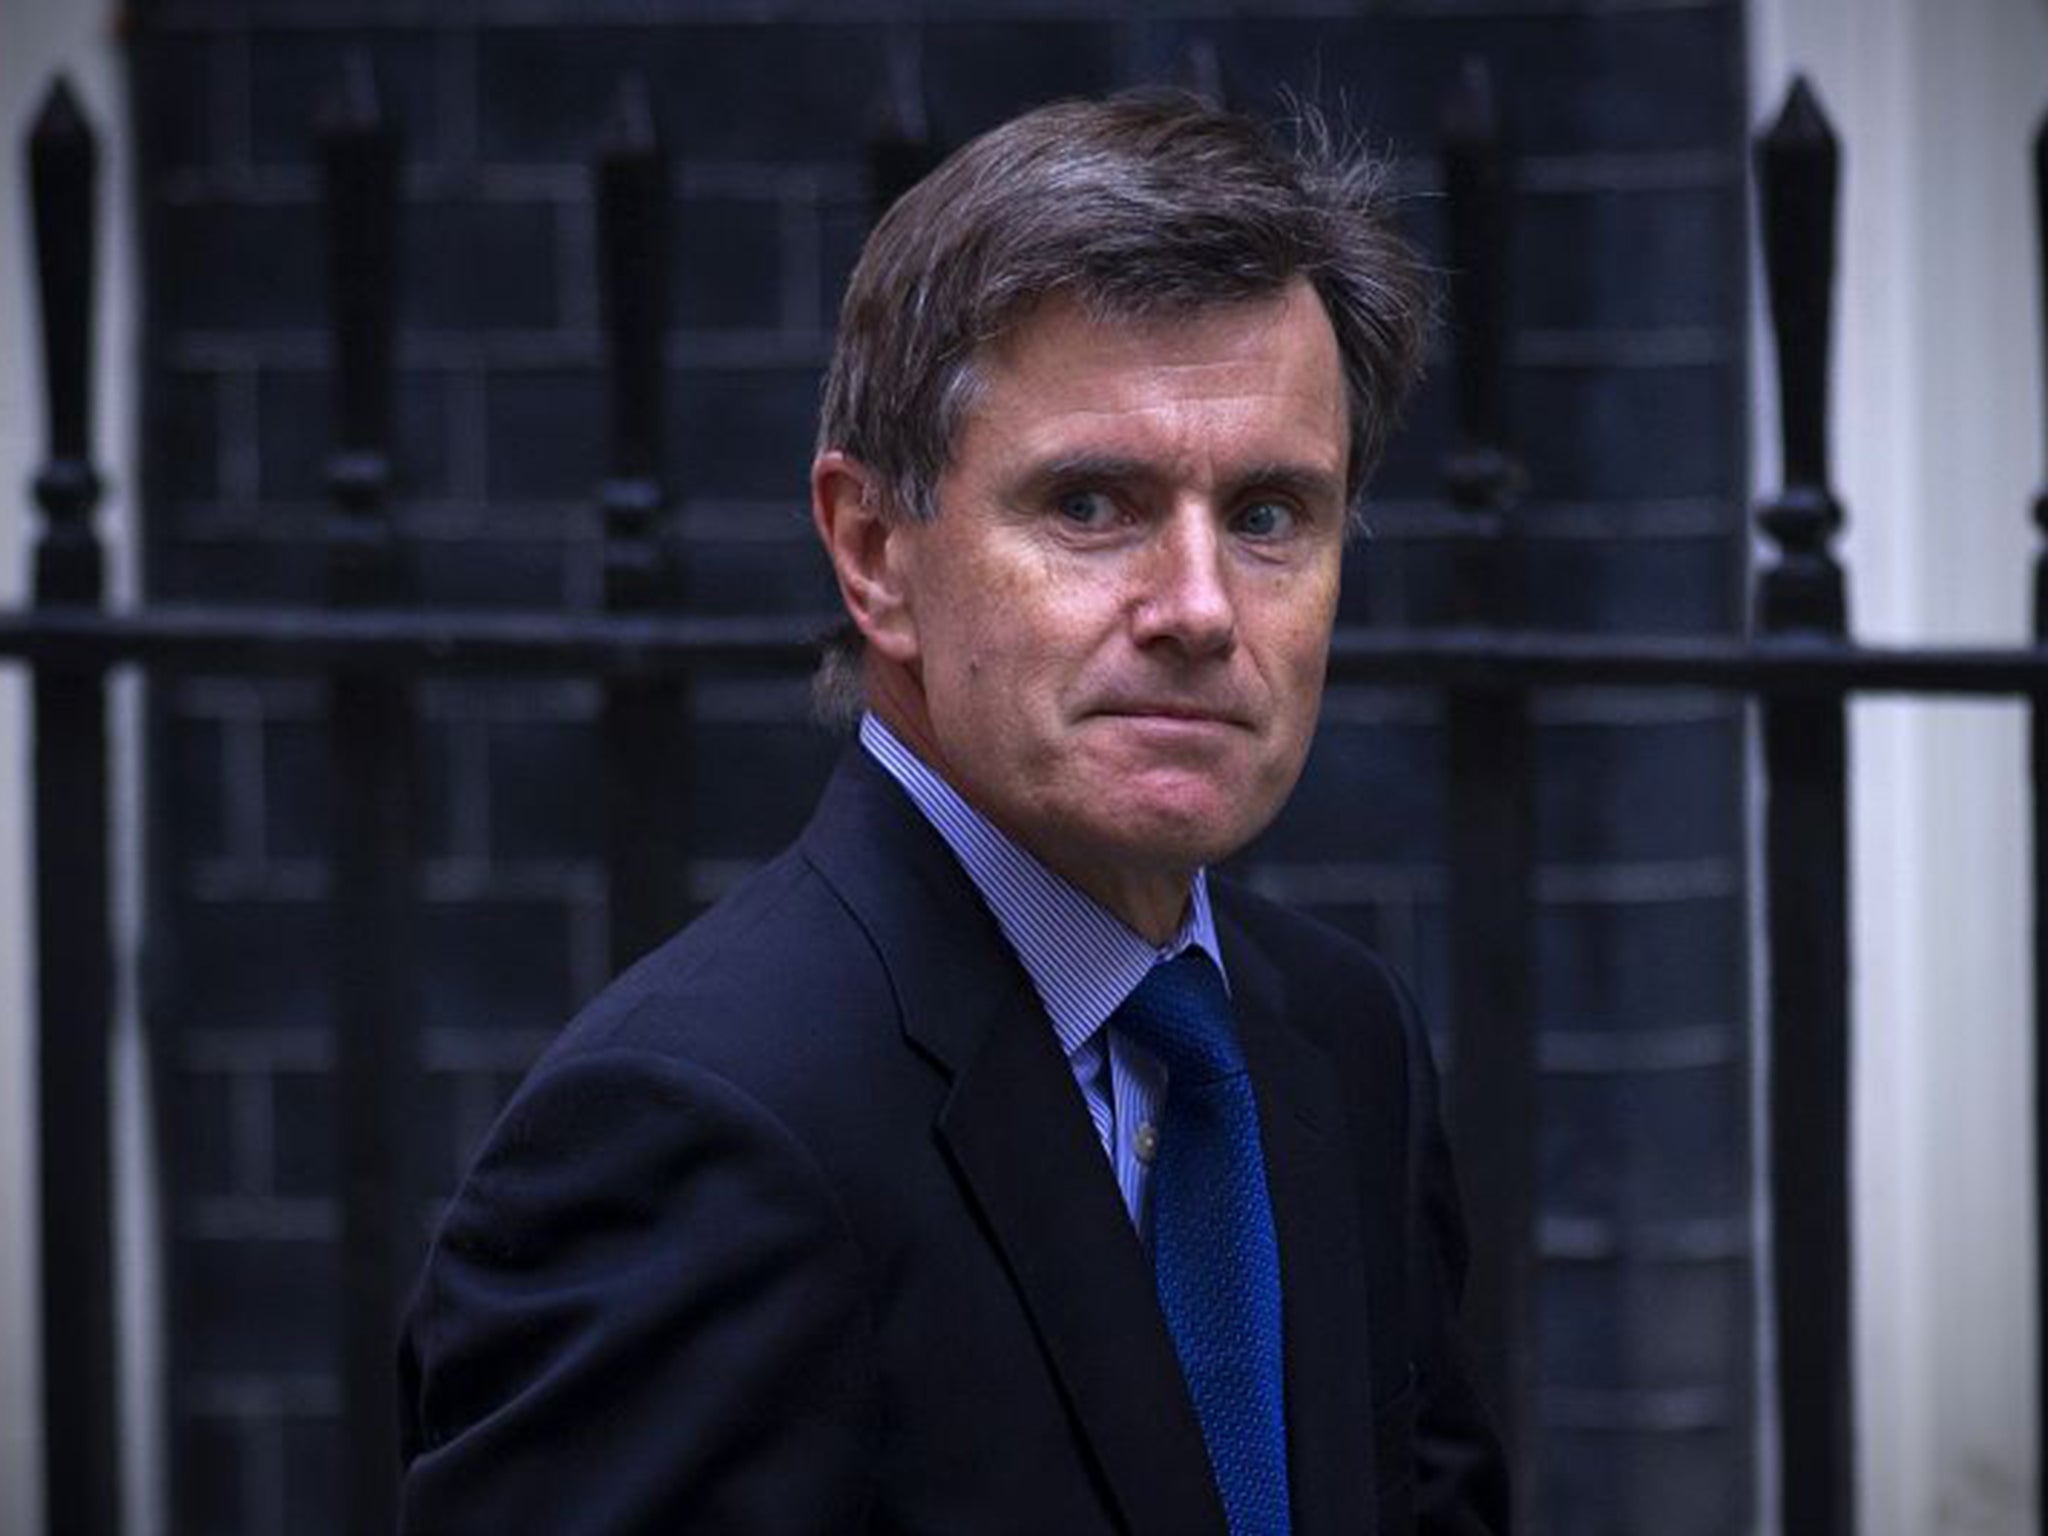 Former MI6 chief Sir John Sawers warned that intelligence sharing would be lost following Brexit